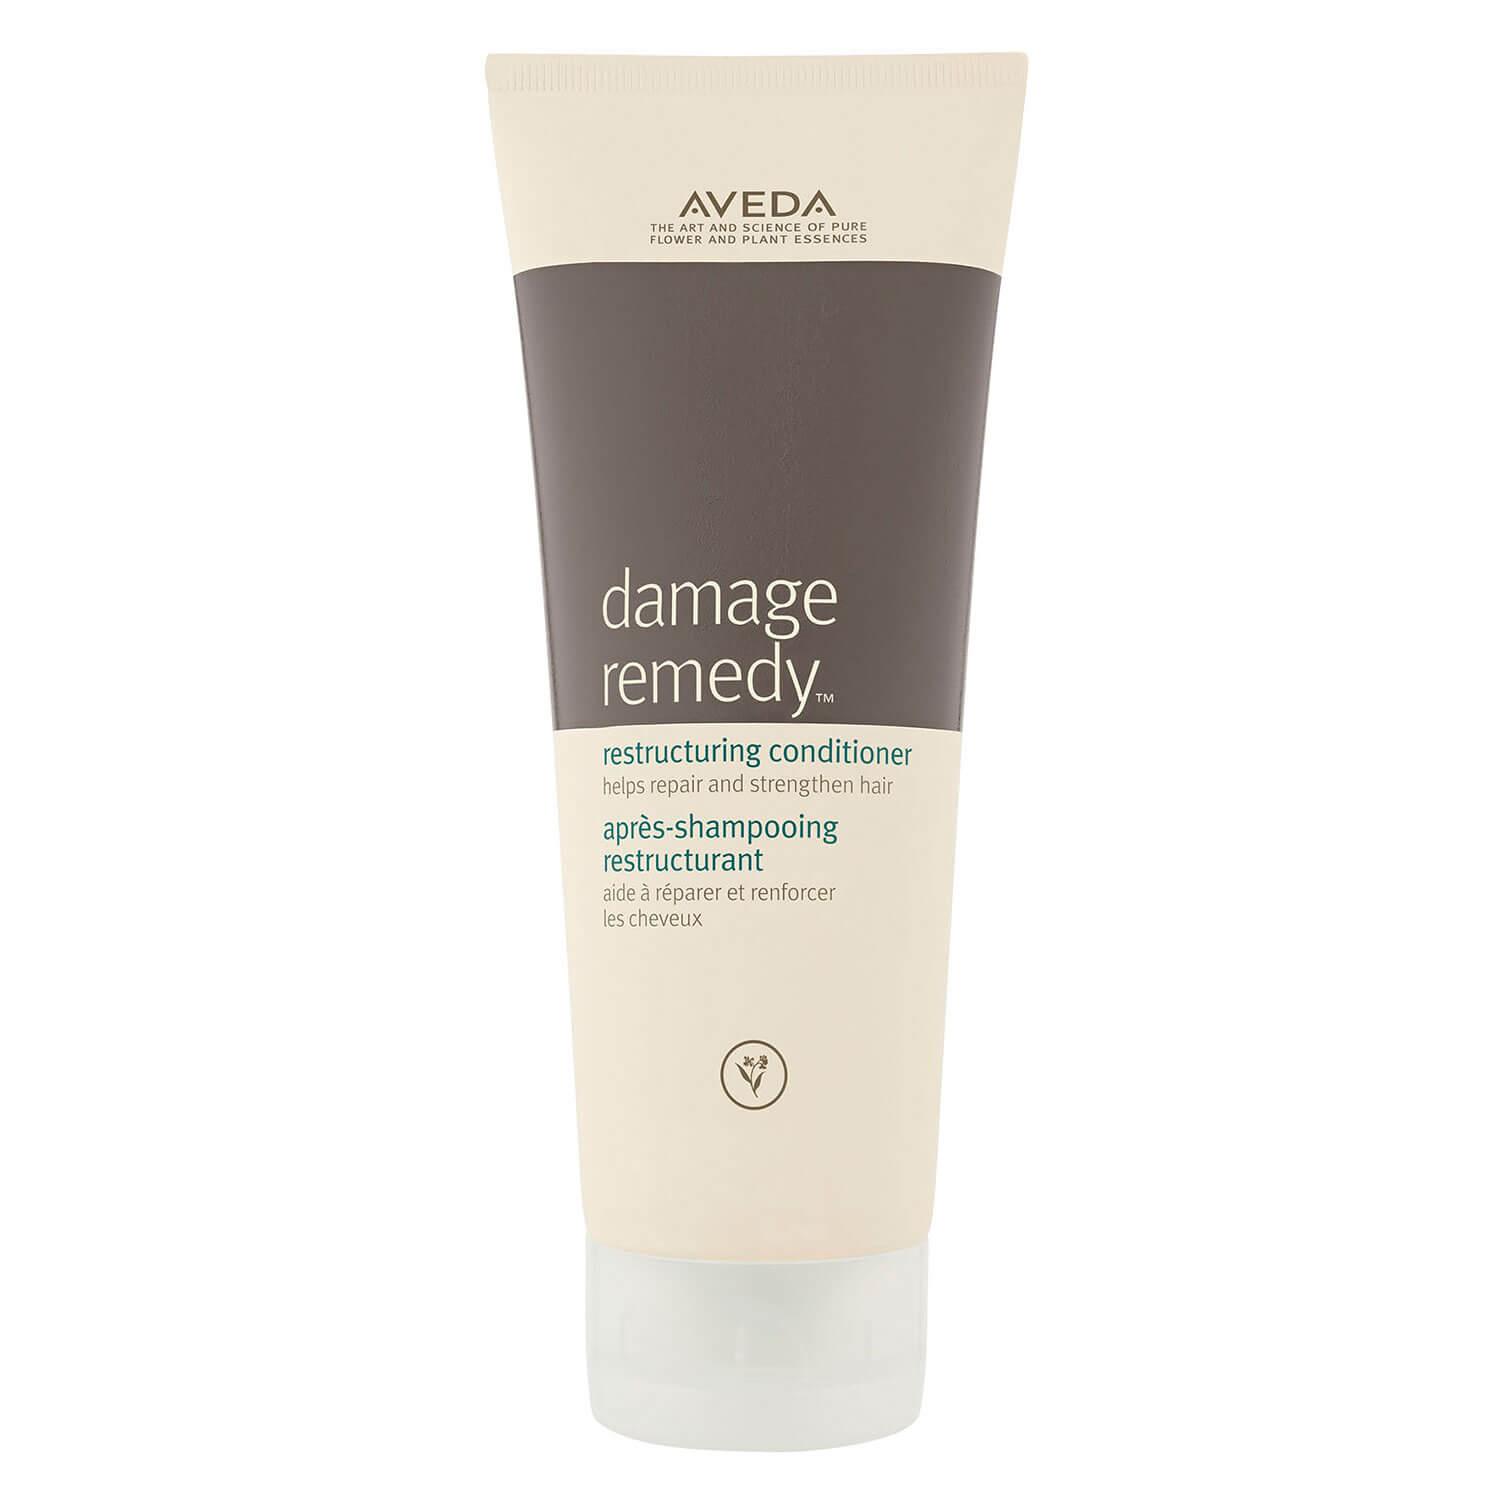 damage remedy - restructuring conditioner